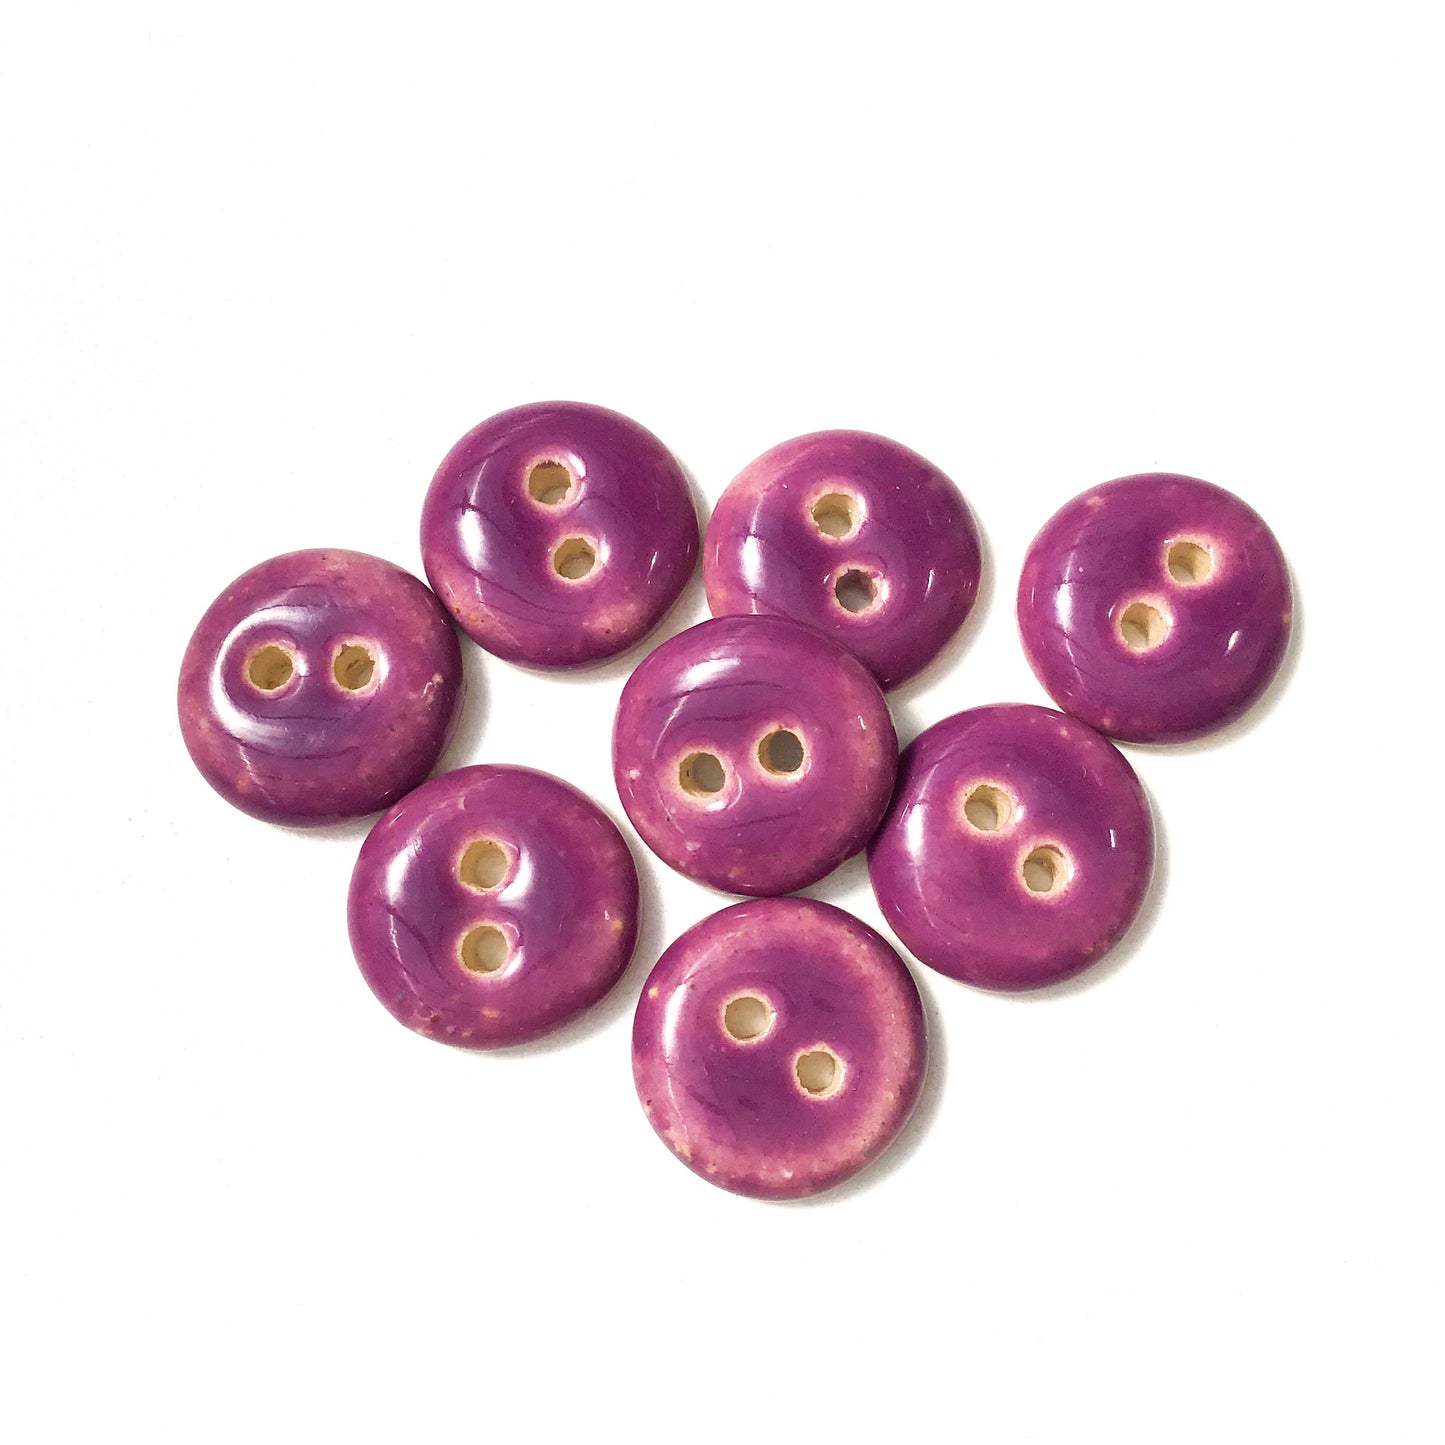 Deep Purple Ceramic Buttons - Purple Clay Buttons - 9/16" - 7 or 8 Pack